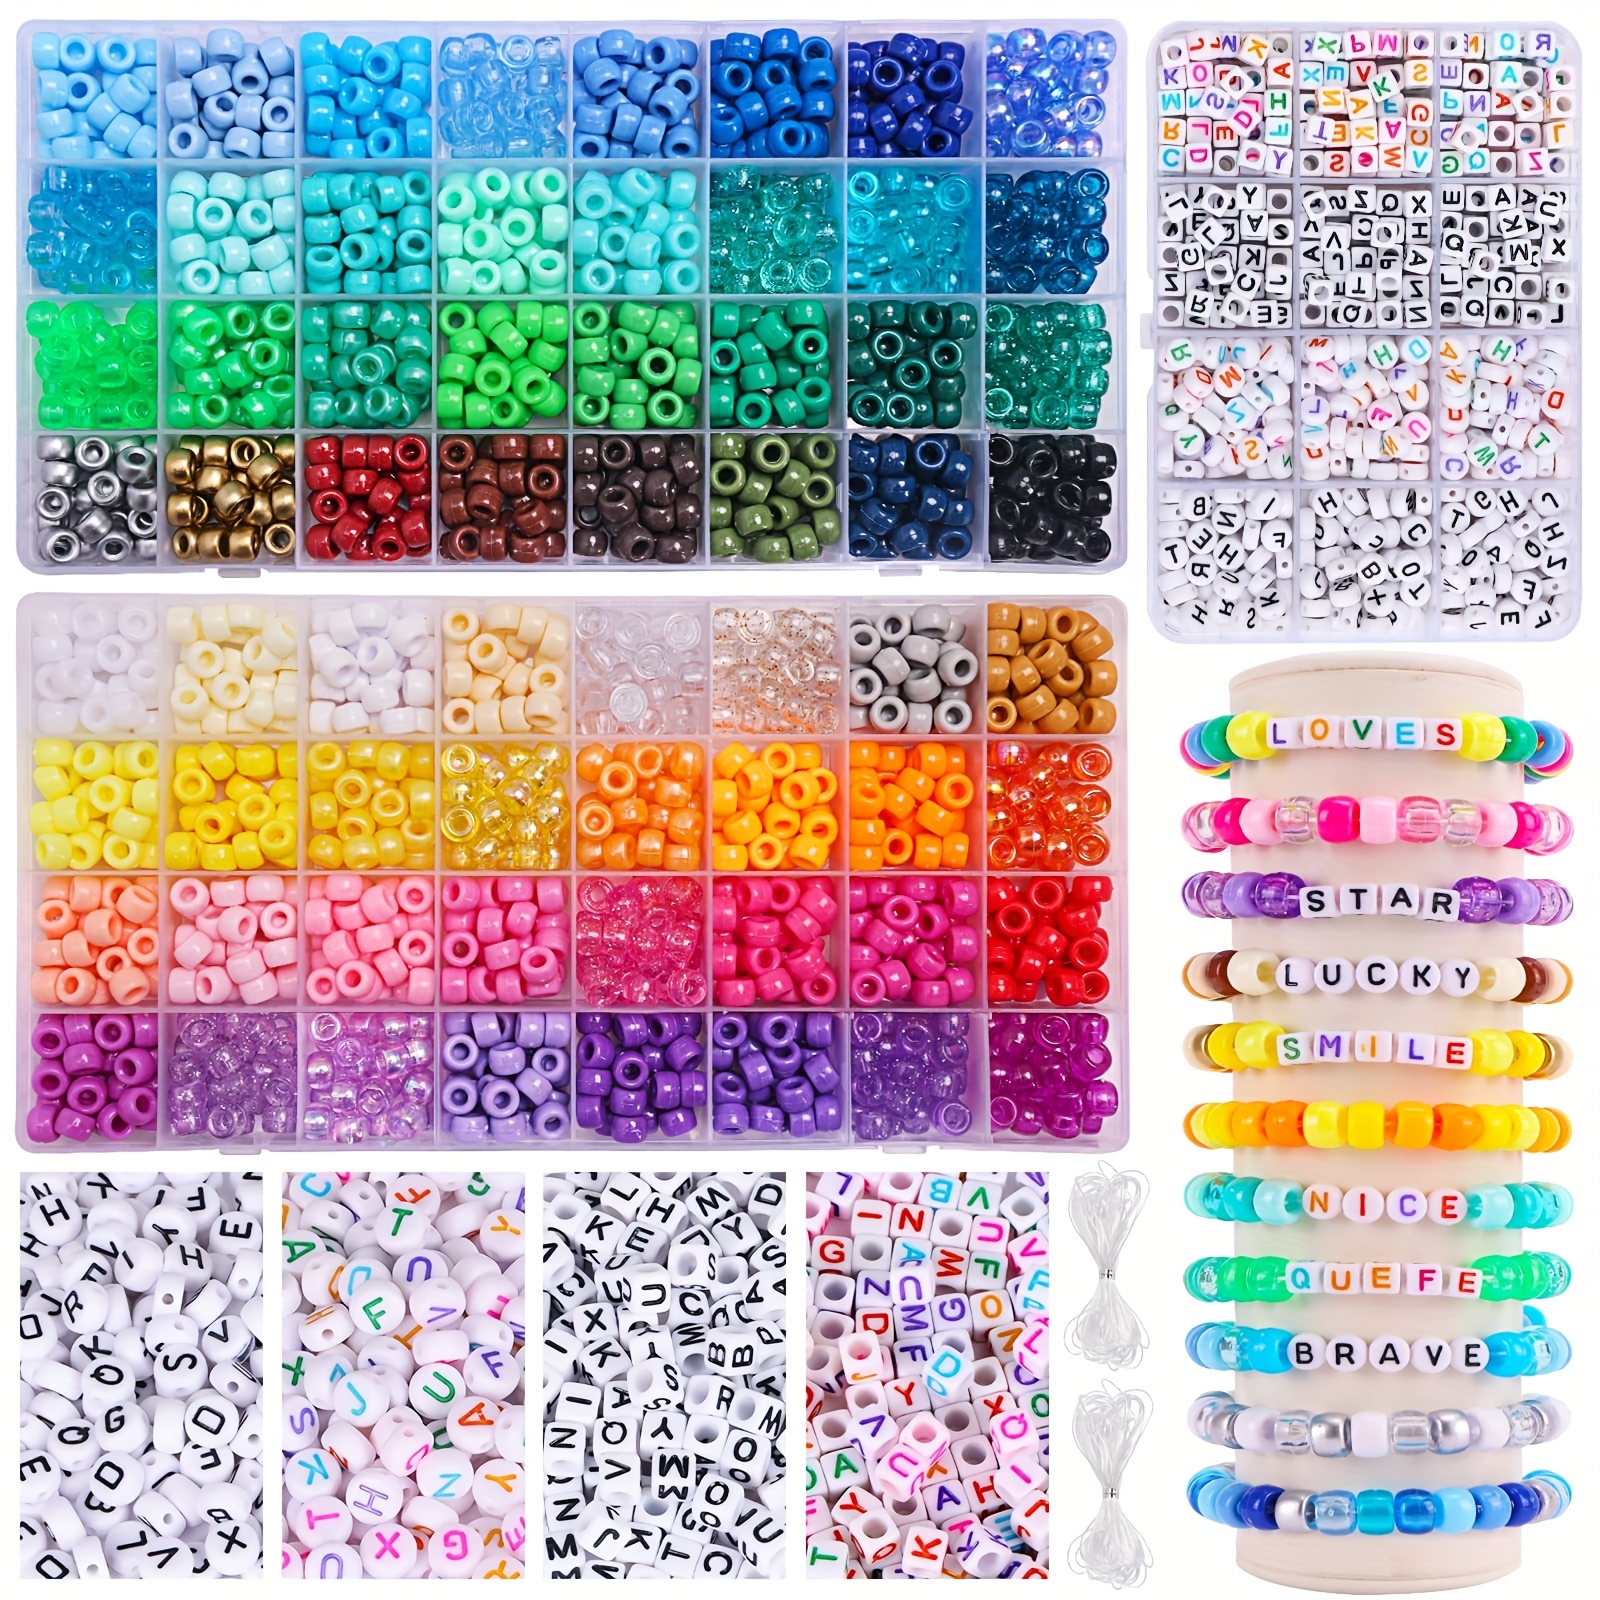 1 Set DIY Kit For Beaded Friendship Bracelet, Necklace And Keychain Making,  Including 10800pcs 3mm Glass Seed Beads, 700pcs Letter Beads, And 2 Rolls  Of Strings